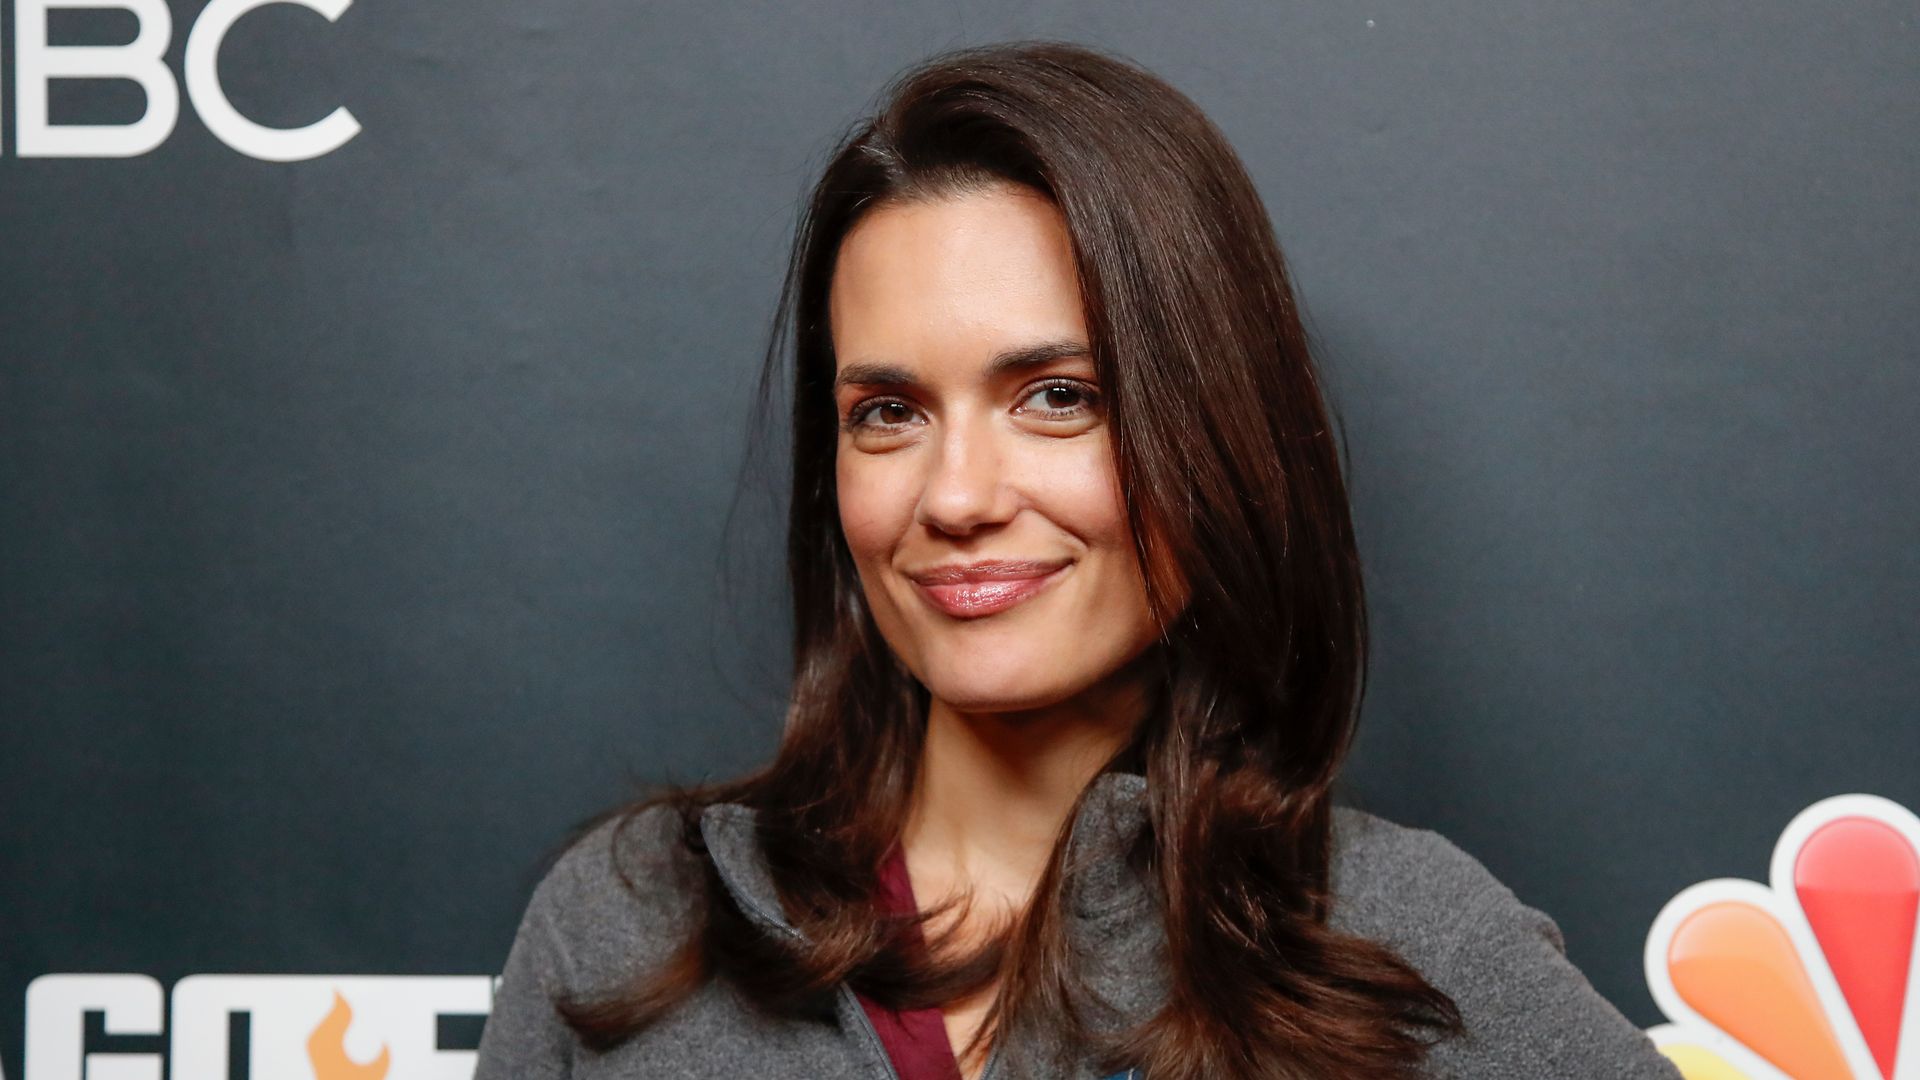 Torrey DeVitto attends the 2019 press day for TV shows "Chicago Fire", "Chicago PD", and "Chicago Med" on October 7, 2019 in Chicago, Illinois